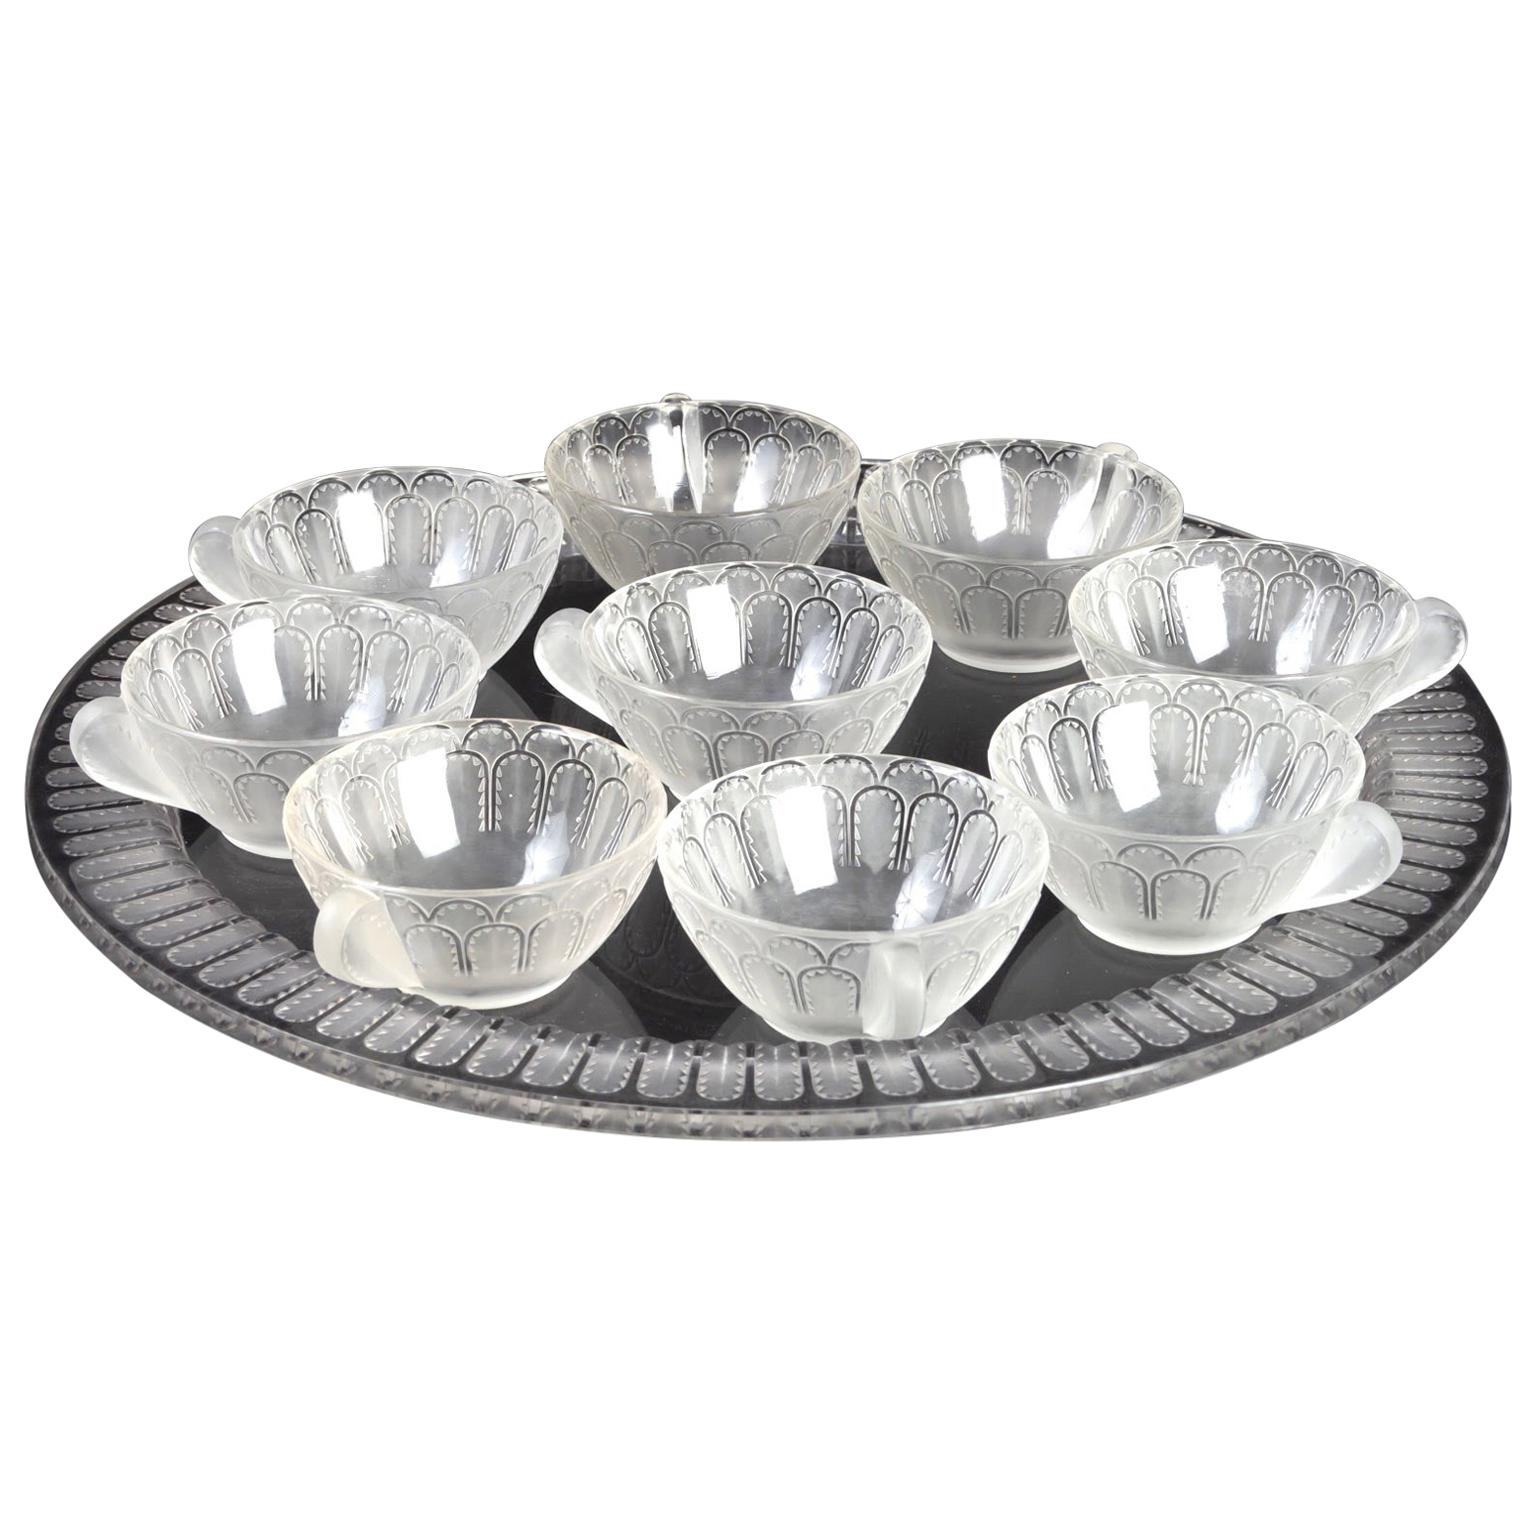 1931 René Lalique Jaffa Set of 9 Ice-Cream Cups and Tray Frosted Glass